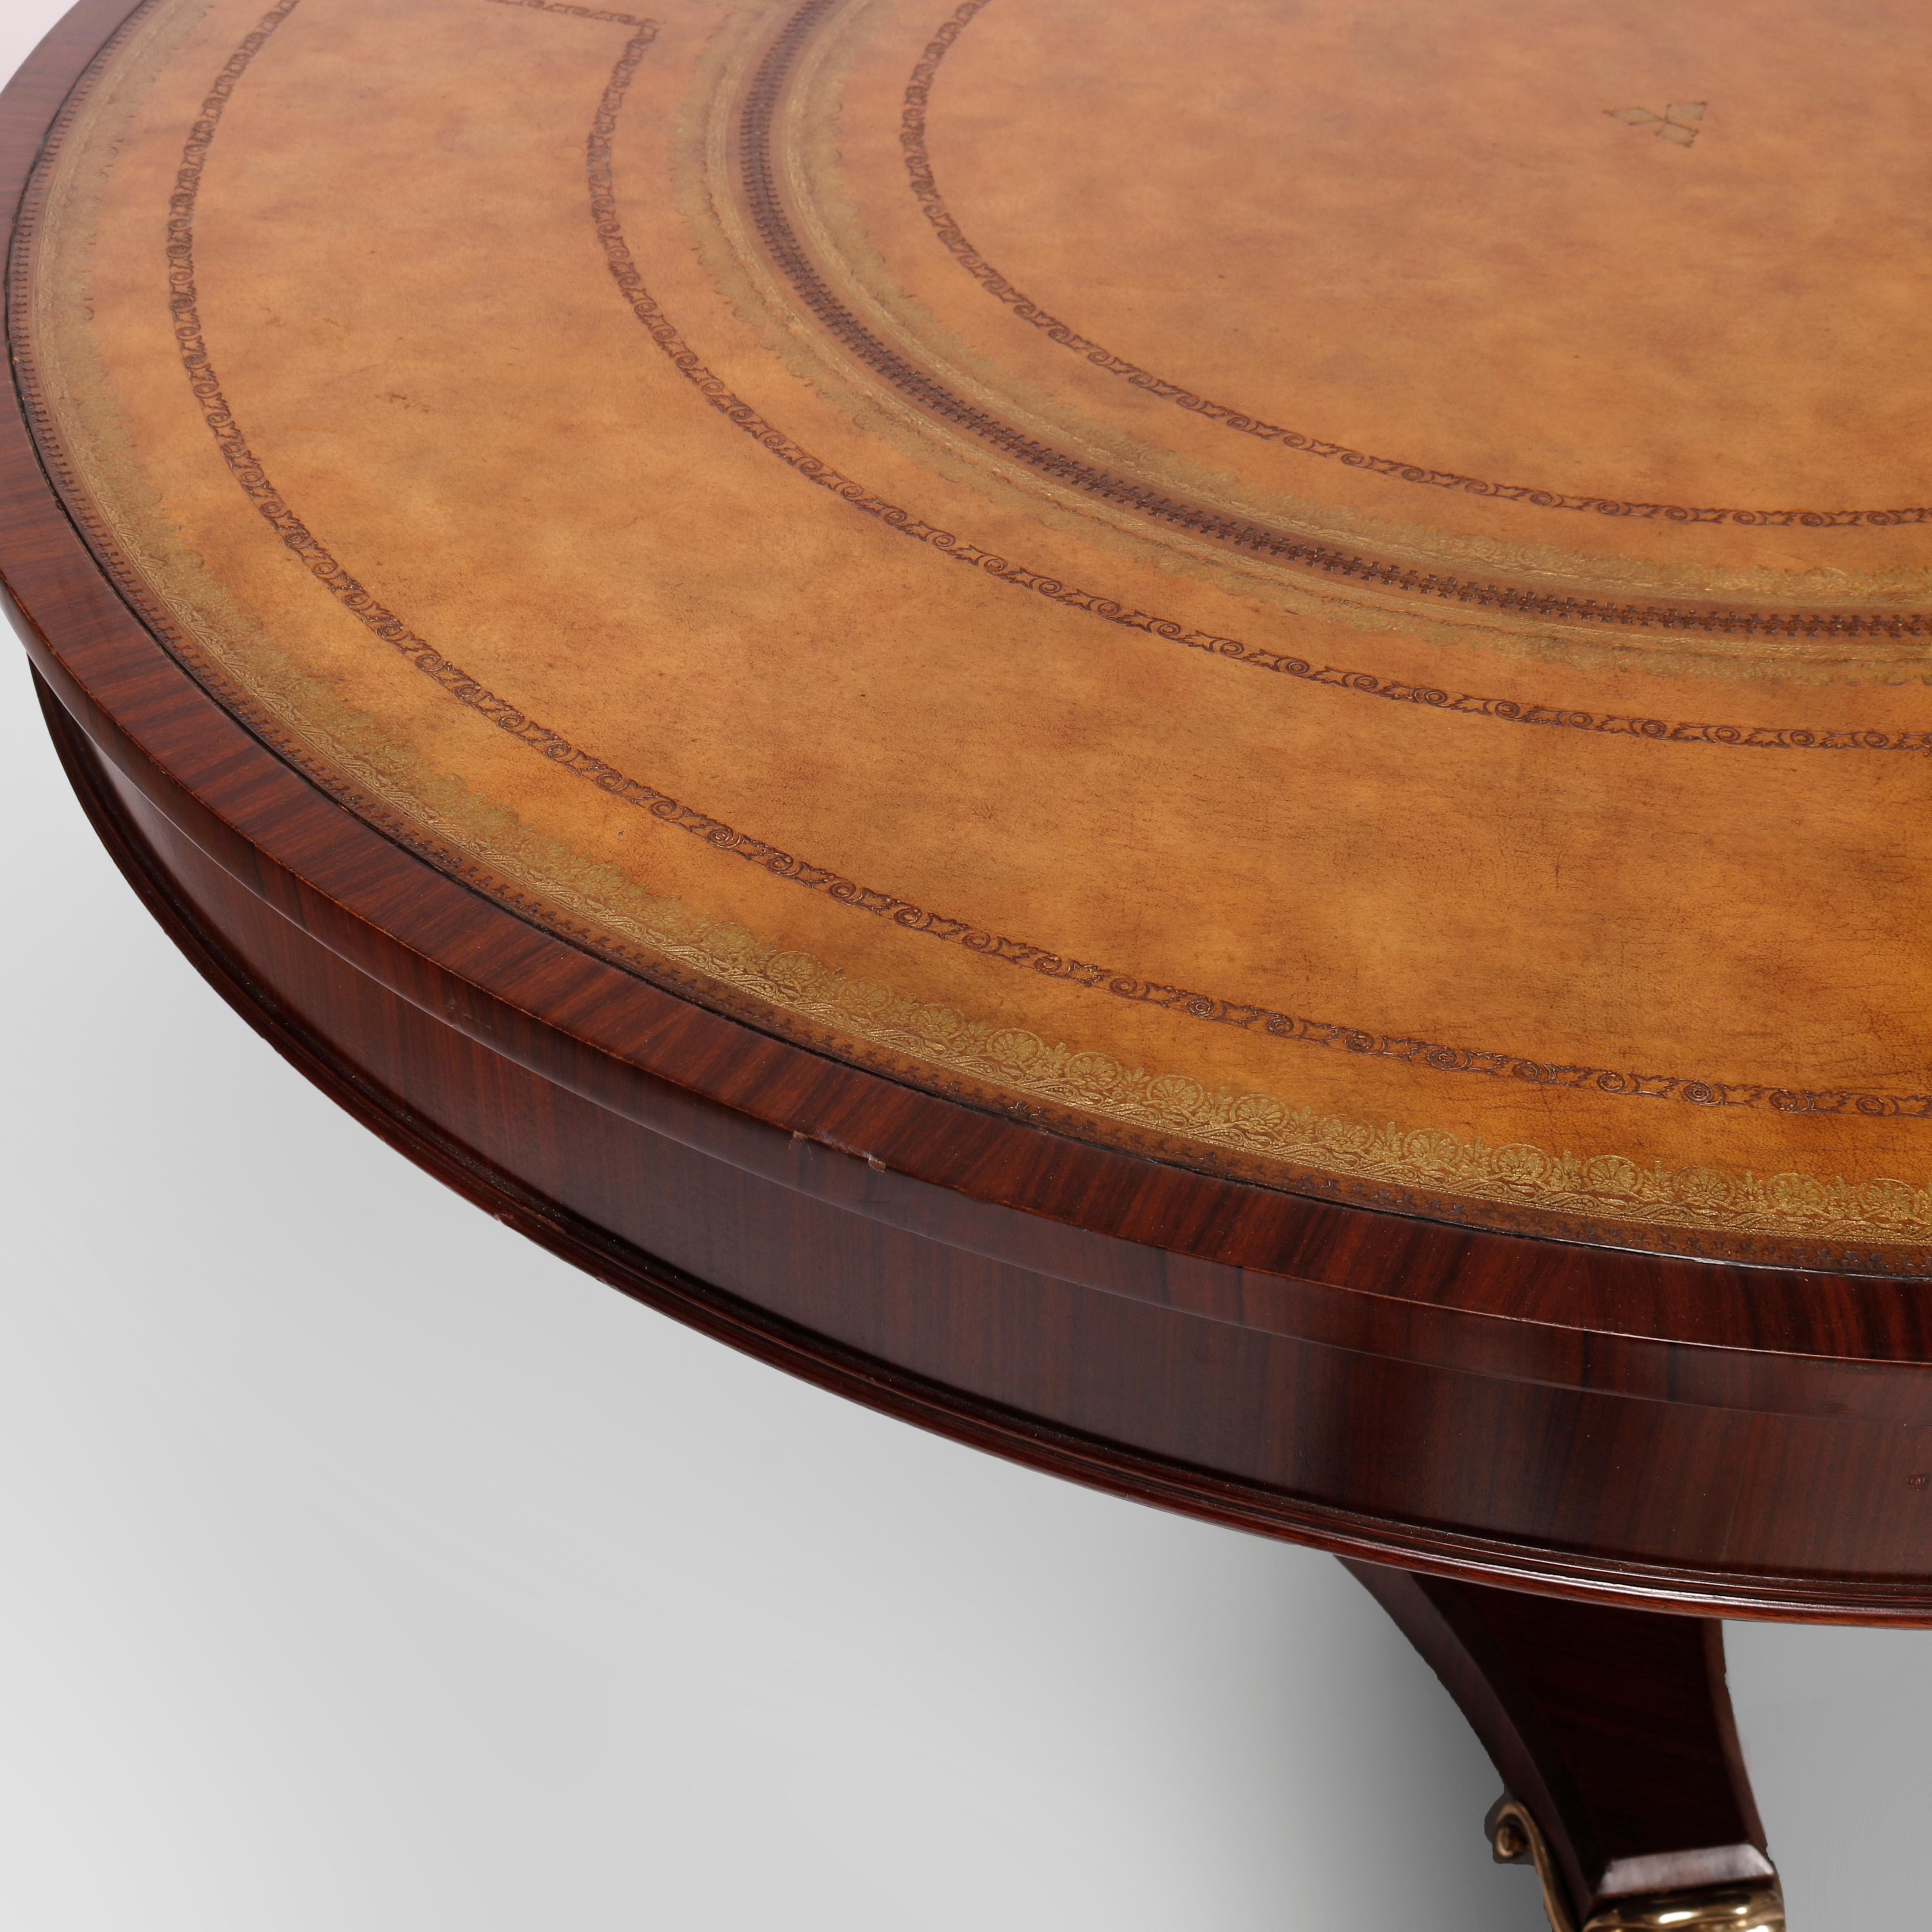 Maitland Smith Neoclassical Rosewood, Mahogany, Leather & Brass Center Table For Sale 1